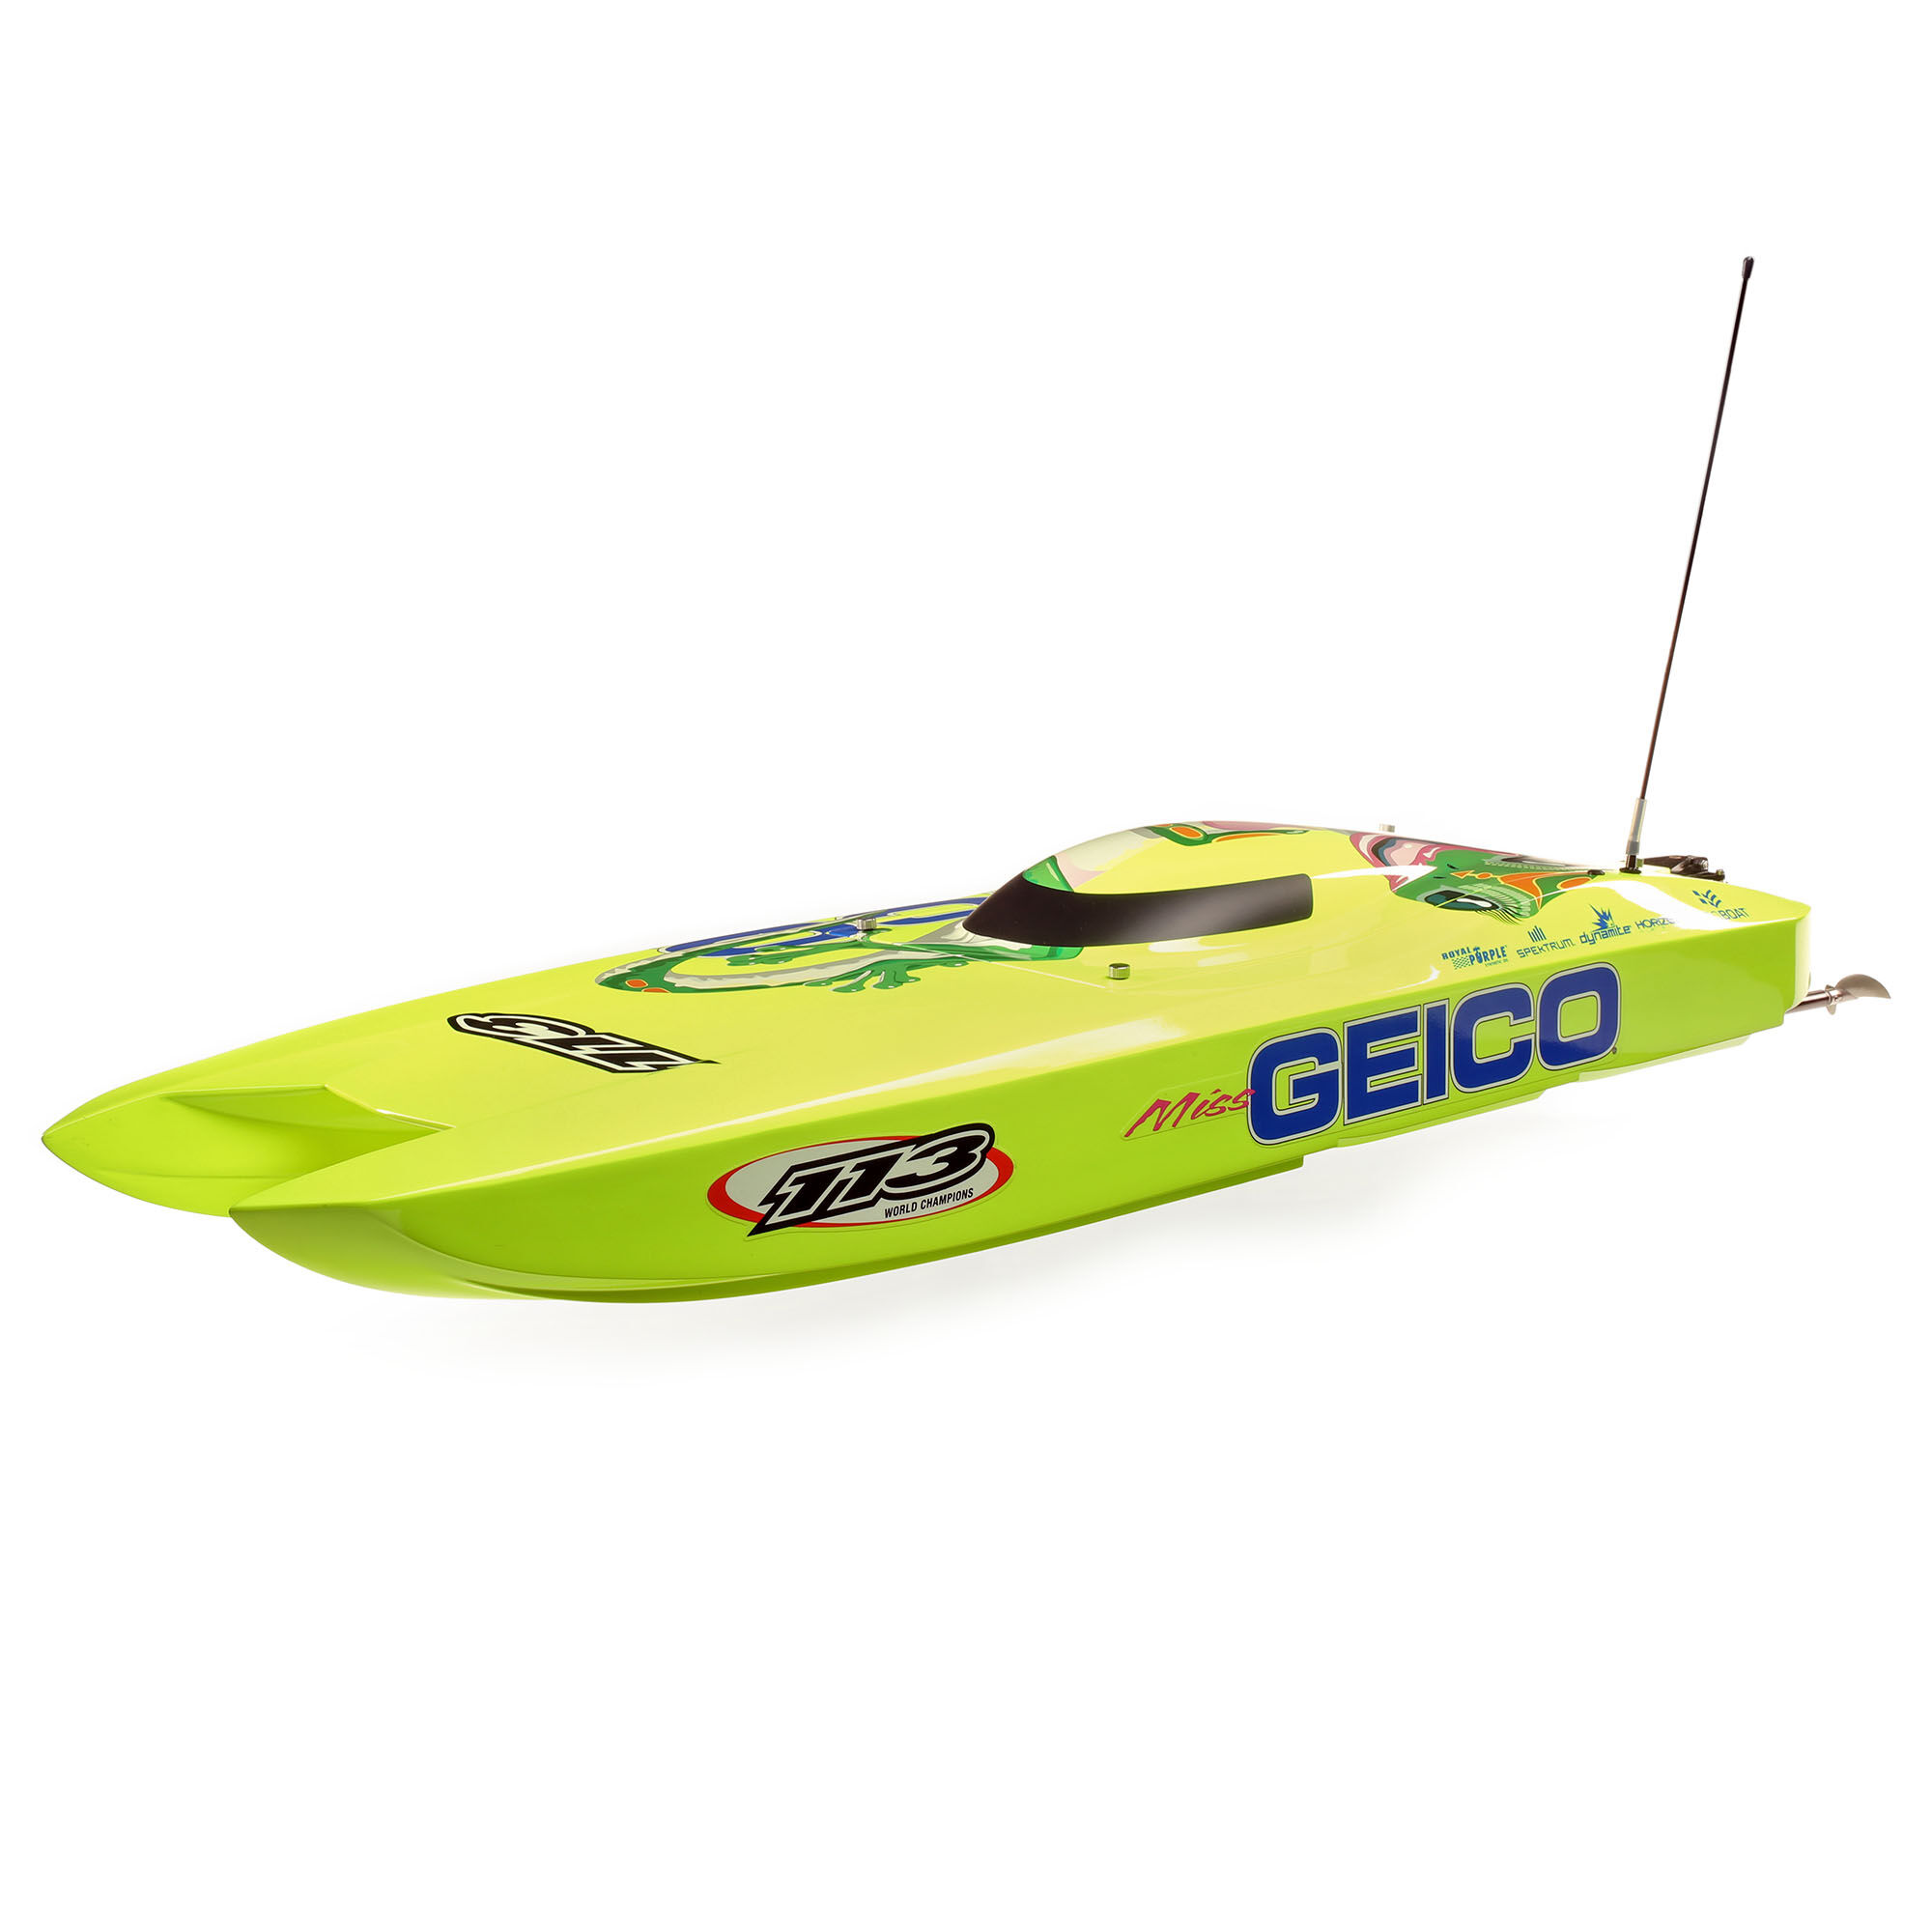 show me rc boats